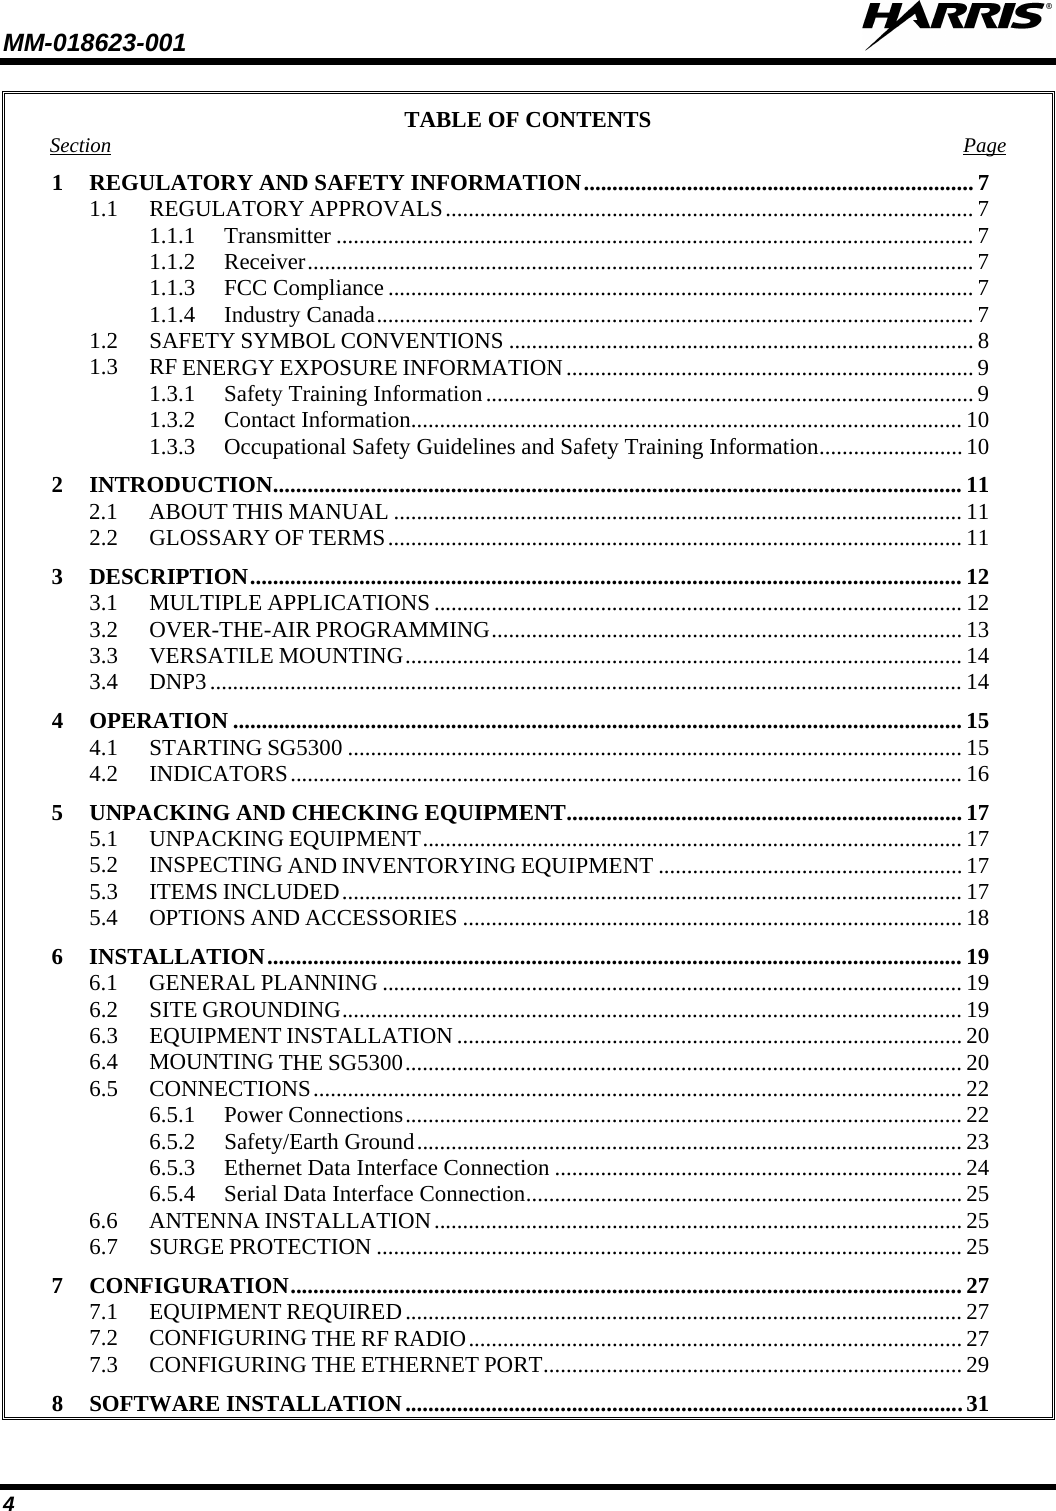 MM-018623-001   4 TABLE OF CONTENTS Section Page 1 REGULATORY AND SAFETY INFORMATION .................................................................... 7 1.1 REGULATORY APPROVALS ............................................................................................ 7 1.1.1 Transmitter ............................................................................................................... 7 1.1.2 Receiver .................................................................................................................... 7 1.1.3 FCC Compliance ...................................................................................................... 7 1.1.4 Industry Canada ........................................................................................................ 7 1.2 SAFETY SYMBOL CONVENTIONS ................................................................................. 8 1.3 RF ENERGY EXPOSURE INFORMATION ....................................................................... 9 1.3.1 Safety Training Information ..................................................................................... 9 1.3.2 Contact Information ................................................................................................ 10 1.3.3 Occupational Safety Guidelines and Safety Training Information ......................... 10 2 INTRODUCTION ........................................................................................................................ 11 2.1 ABOUT THIS MANUAL ................................................................................................... 11 2.2 GLOSSARY OF TERMS .................................................................................................... 11 3 DESCRIPTION ............................................................................................................................ 12 3.1 MULTIPLE APPLICATIONS ............................................................................................ 12 3.2 OVER-THE-AIR PROGRAMMING .................................................................................. 13 3.3 VERSATILE MOUNTING ................................................................................................. 14 3.4 DNP3 ................................................................................................................................... 14 4 OPERATION ............................................................................................................................... 15 4.1 STARTING SG5300 ........................................................................................................... 15 4.2 INDICATORS ..................................................................................................................... 16 5 UNPACKING AND CHECKING EQUIPMENT ..................................................................... 17 5.1 UNPACKING EQUIPMENT .............................................................................................. 17 5.2 INSPECTING AND INVENTORYING EQUIPMENT ..................................................... 17 5.3 ITEMS INCLUDED ............................................................................................................ 17 5.4 OPTIONS AND ACCESSORIES ....................................................................................... 18 6 INSTALLATION ......................................................................................................................... 19 6.1 GENERAL PLANNING ..................................................................................................... 19 6.2 SITE GROUNDING ............................................................................................................ 19 6.3 EQUIPMENT INSTALLATION ........................................................................................ 20 6.4 MOUNTING THE SG5300 ................................................................................................. 20 6.5 CONNECTIONS ................................................................................................................. 22 6.5.1 Power Connections ................................................................................................. 22 6.5.2 Safety/Earth Ground ............................................................................................... 23 6.5.3 Ethernet Data Interface Connection ....................................................................... 24 6.5.4 Serial Data Interface Connection ............................................................................ 25 6.6 ANTENNA INSTALLATION ............................................................................................ 25 6.7 SURGE PROTECTION ...................................................................................................... 25 7 CONFIGURATION ..................................................................................................................... 27 7.1 EQUIPMENT REQUIRED ................................................................................................. 27 7.2 CONFIGURING THE RF RADIO ...................................................................................... 27 7.3 CONFIGURING THE ETHERNET PORT ......................................................................... 29 8 SOFTWARE INSTALLATION ................................................................................................. 31 